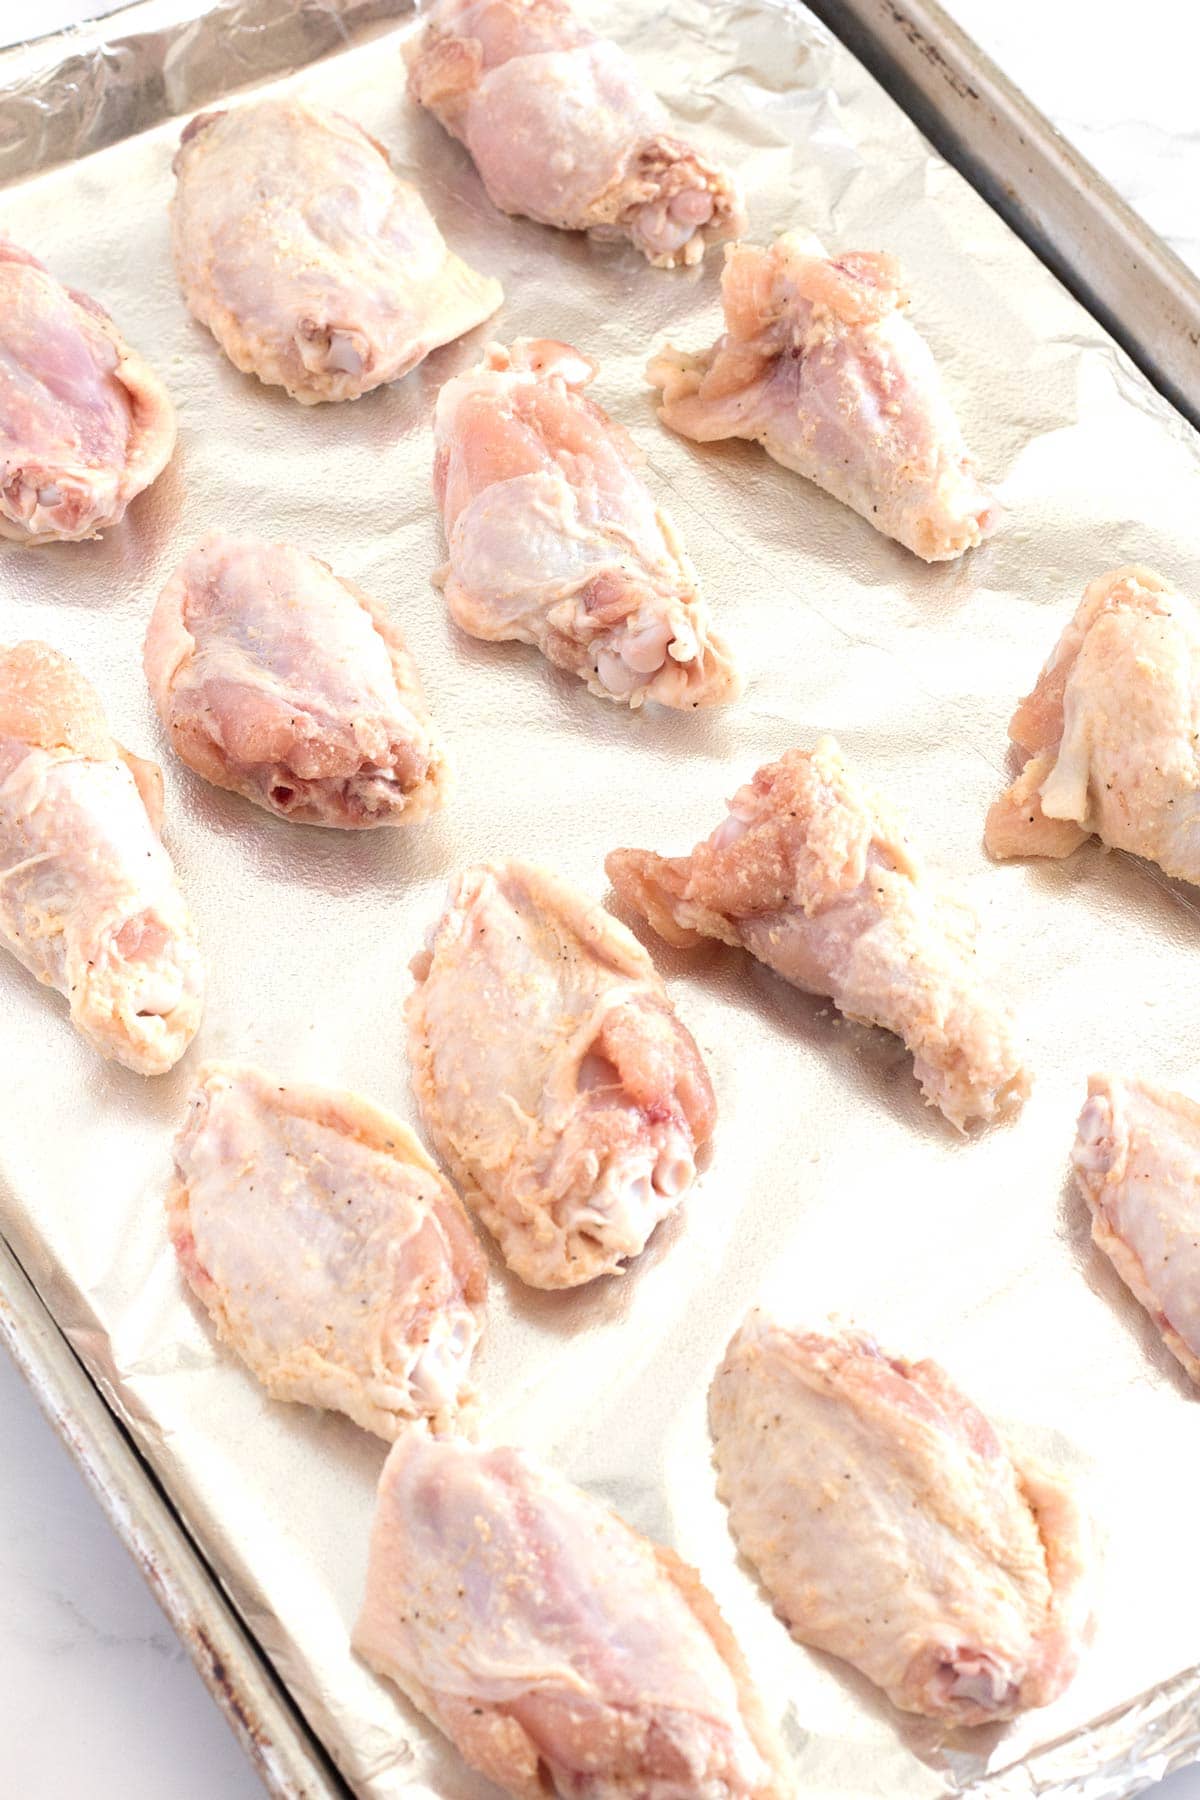 Chicken wings laid out on prepared sheet pan.